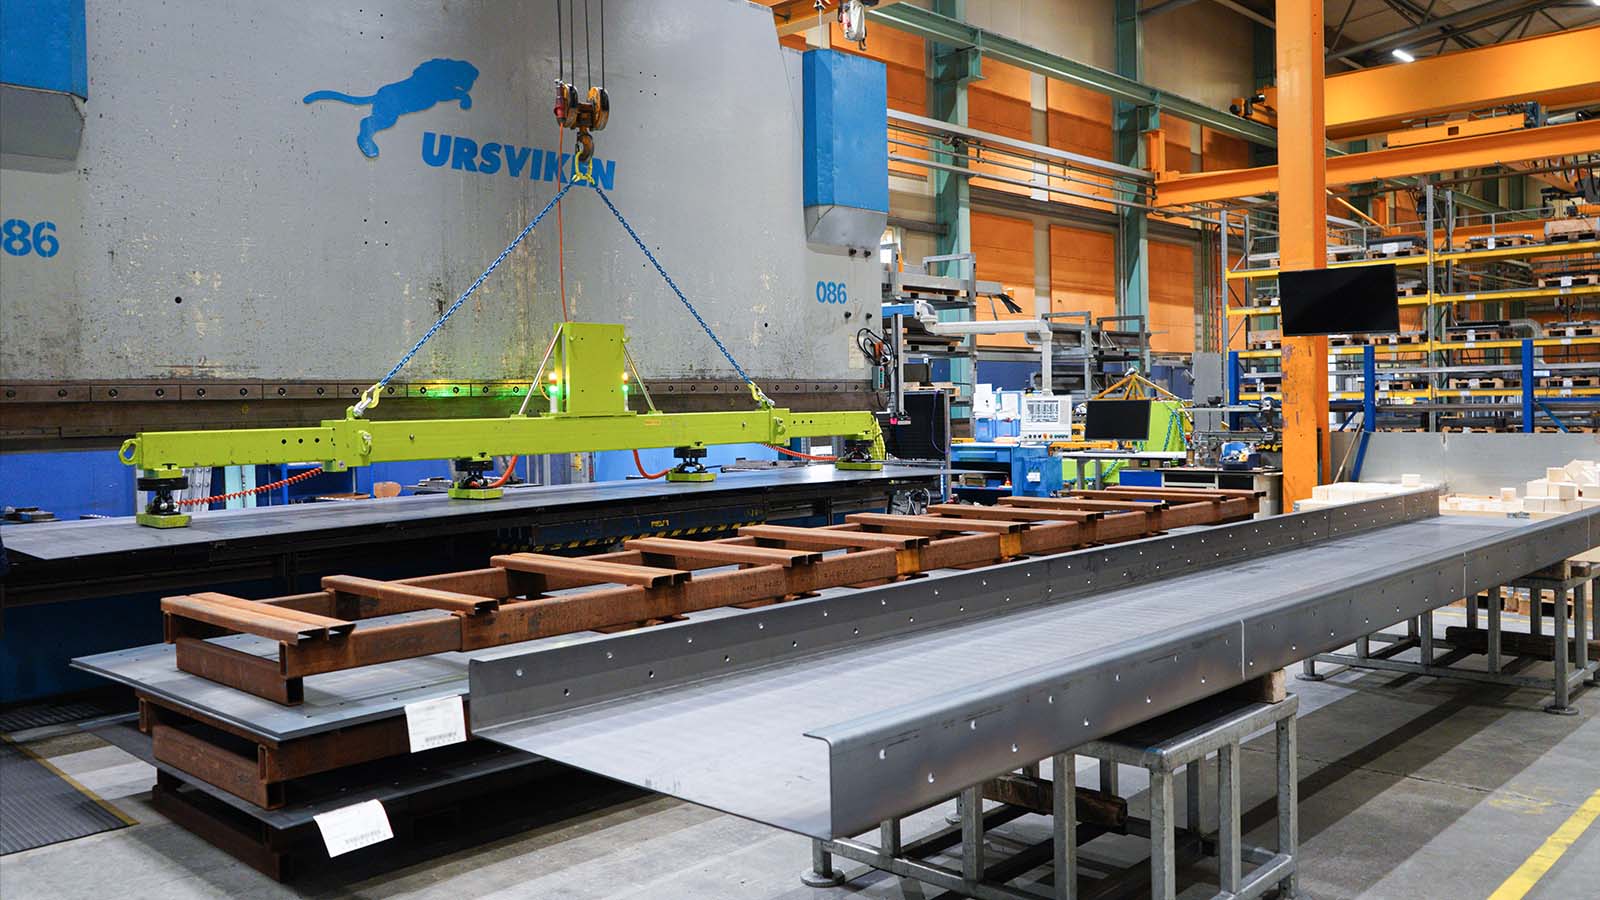 Large steel components positioned in front of a press brake